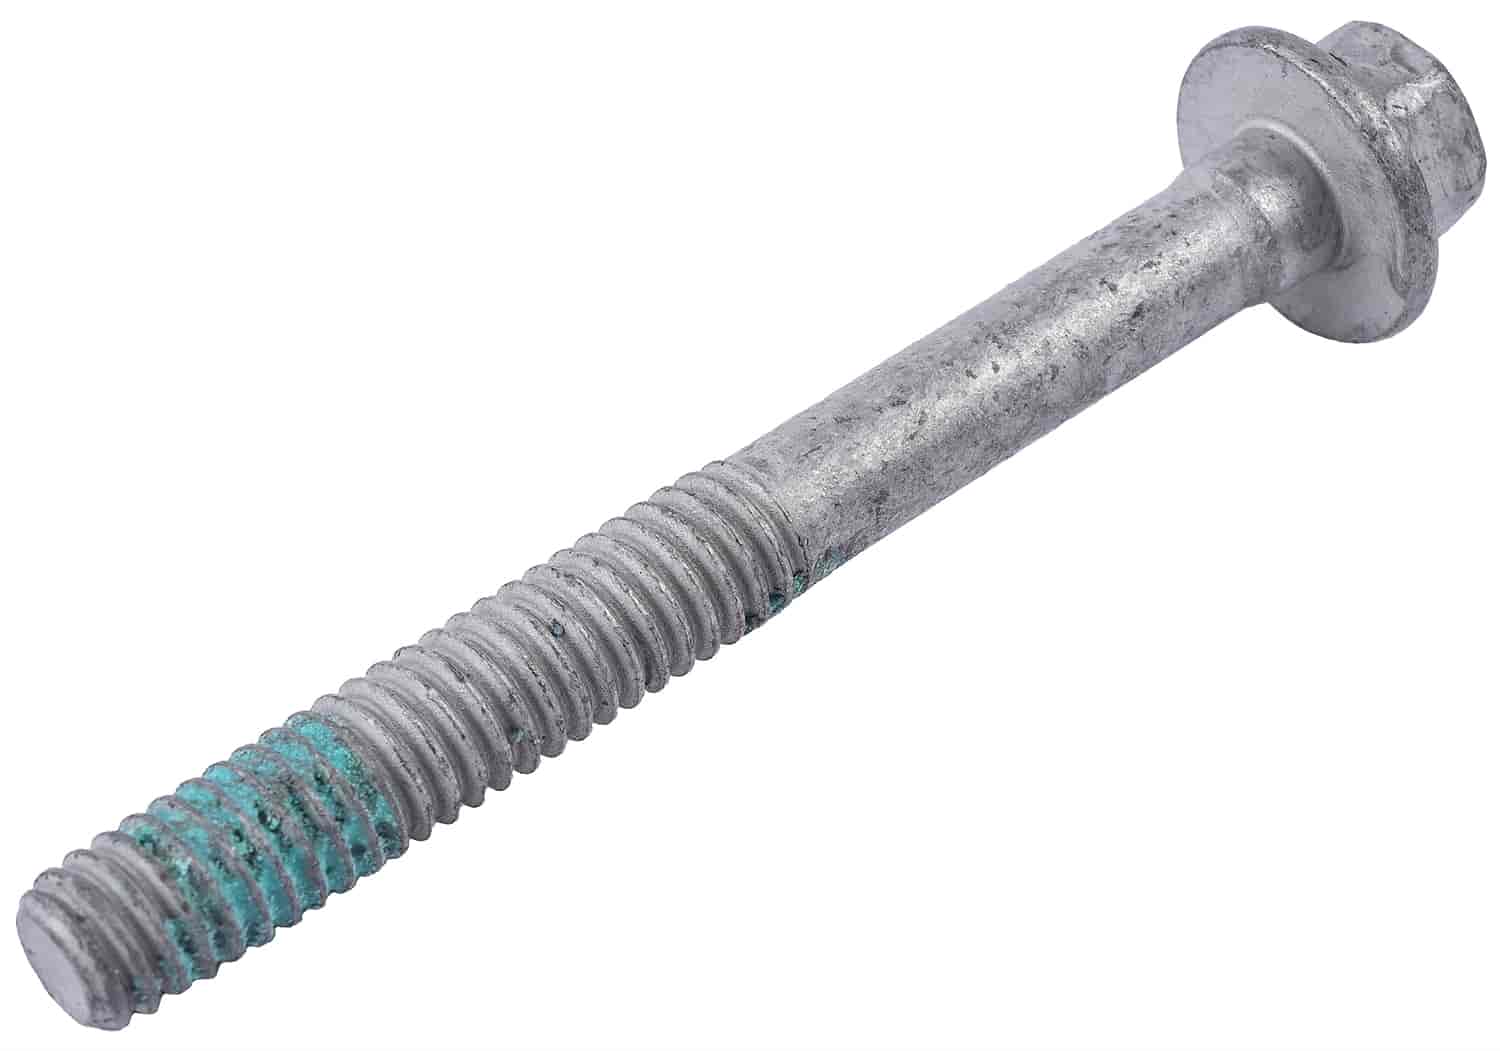 Cylinder Head Bolt for 1997-2019 C5R, L92, LS3, LS6, LS7, & LS9 Cylinder Head [4 3/8 in. (111 mm) Overall Length]